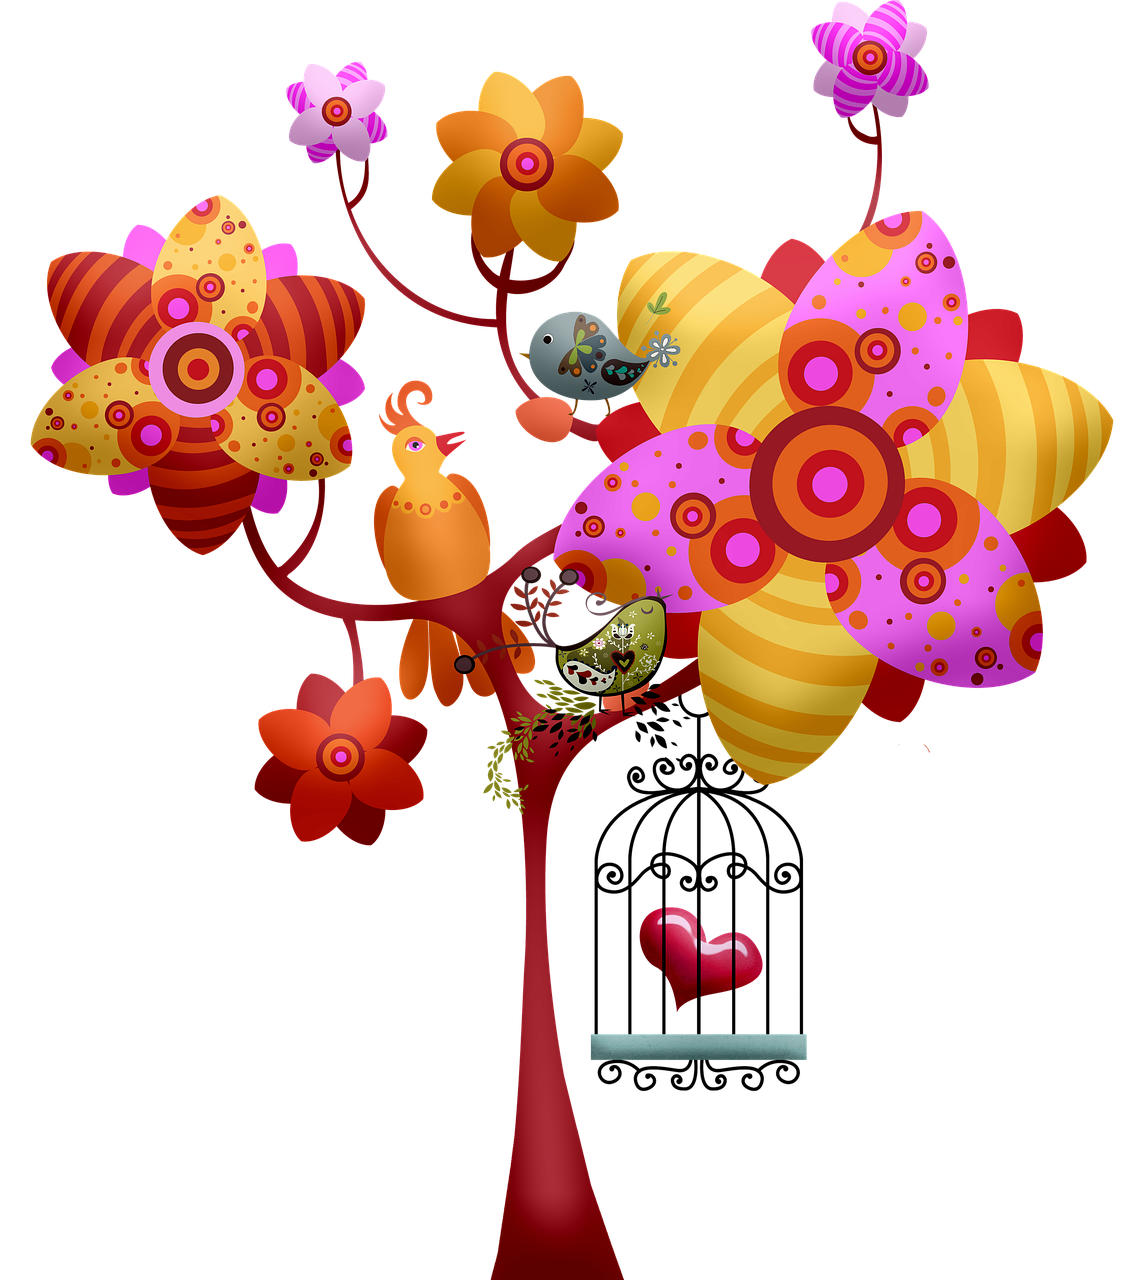 a picture of a tree with birds and flowers, vector art, deviantart contest winner, pink and orange colors, on black background, beautiful composition 3 - d 4 k, cute colorful adorable